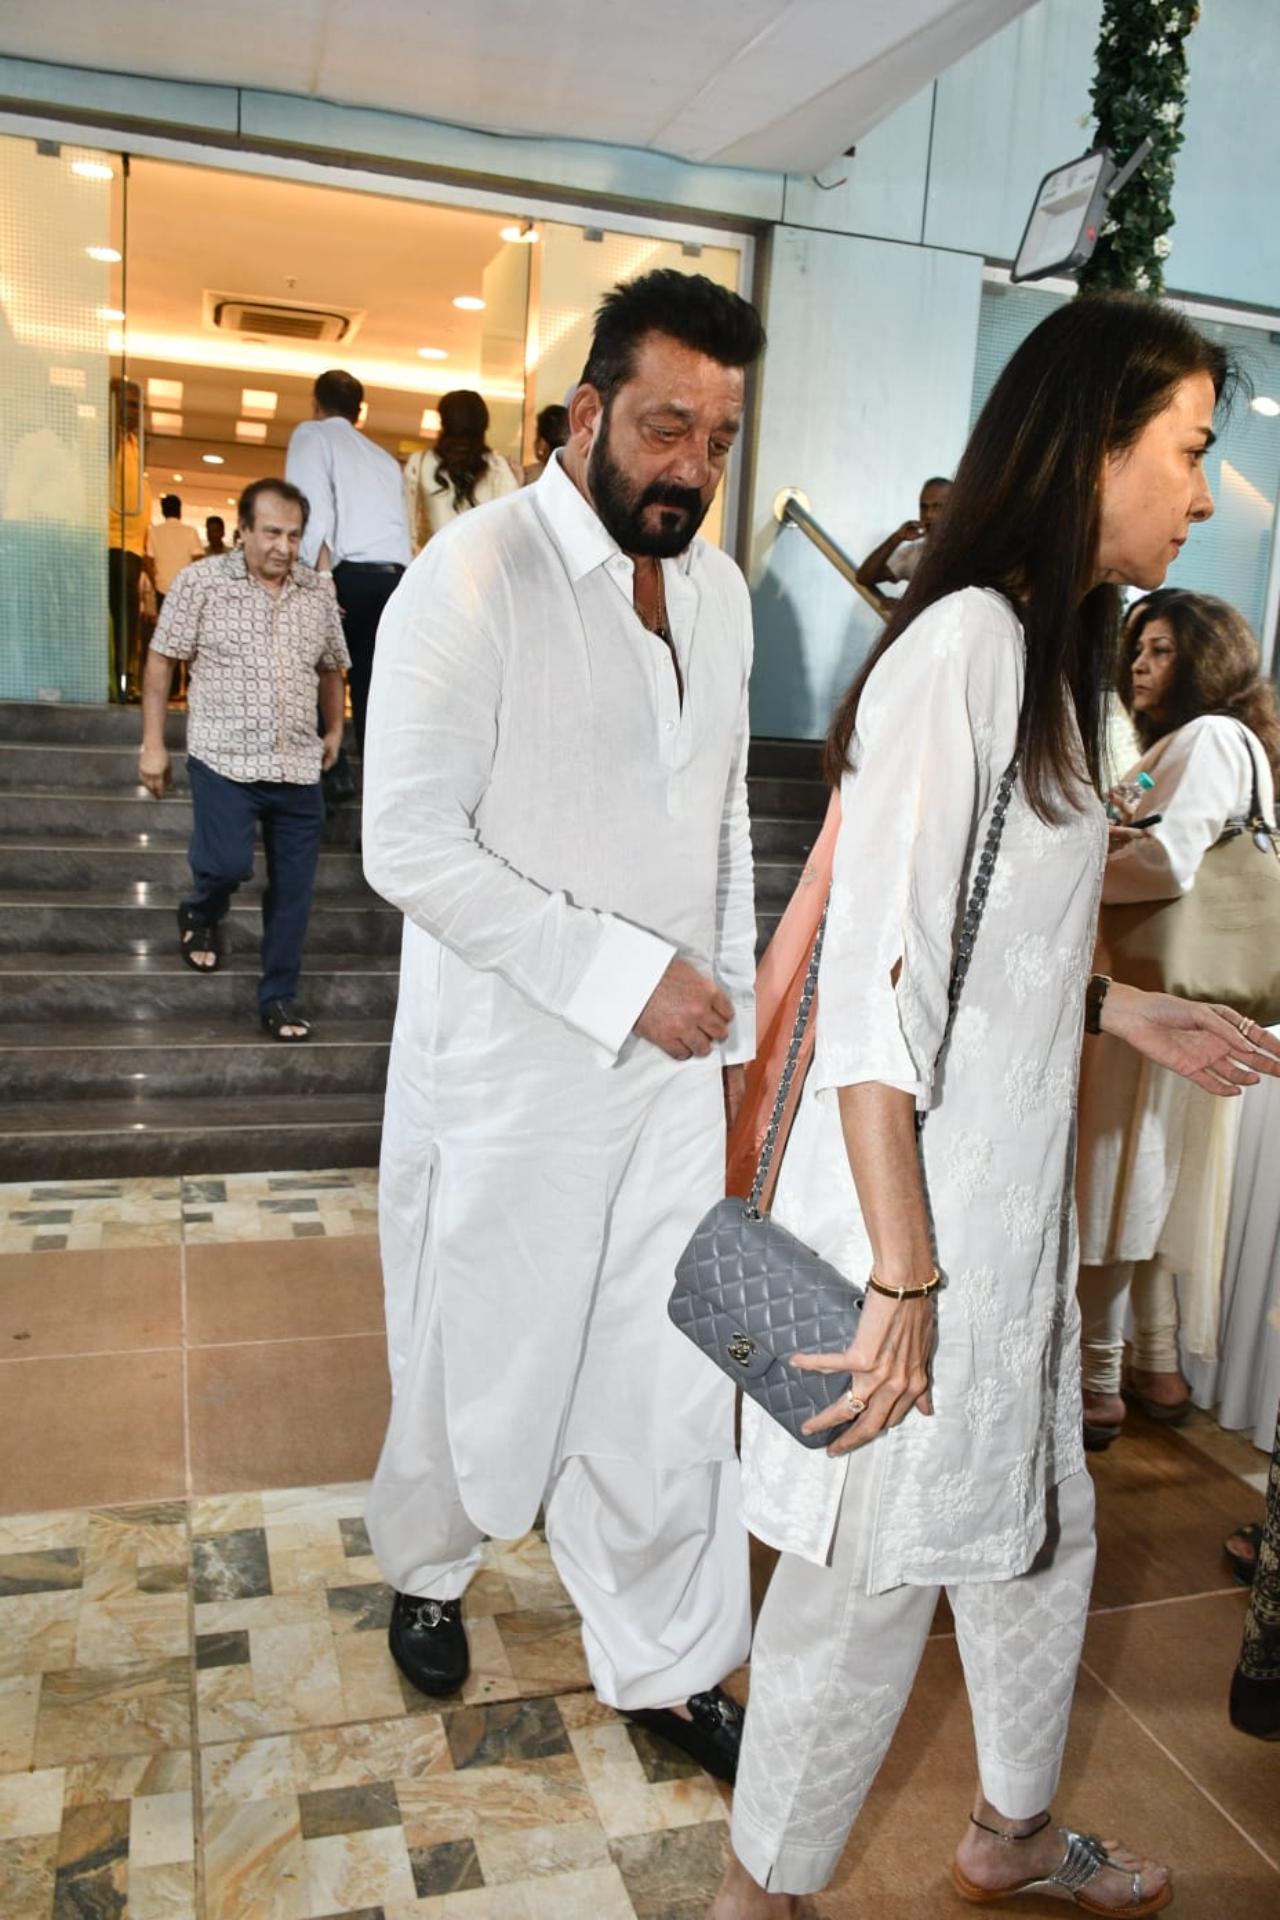 Actor Sanjay Dutt who has several projects in his kitty was also seen at the meet